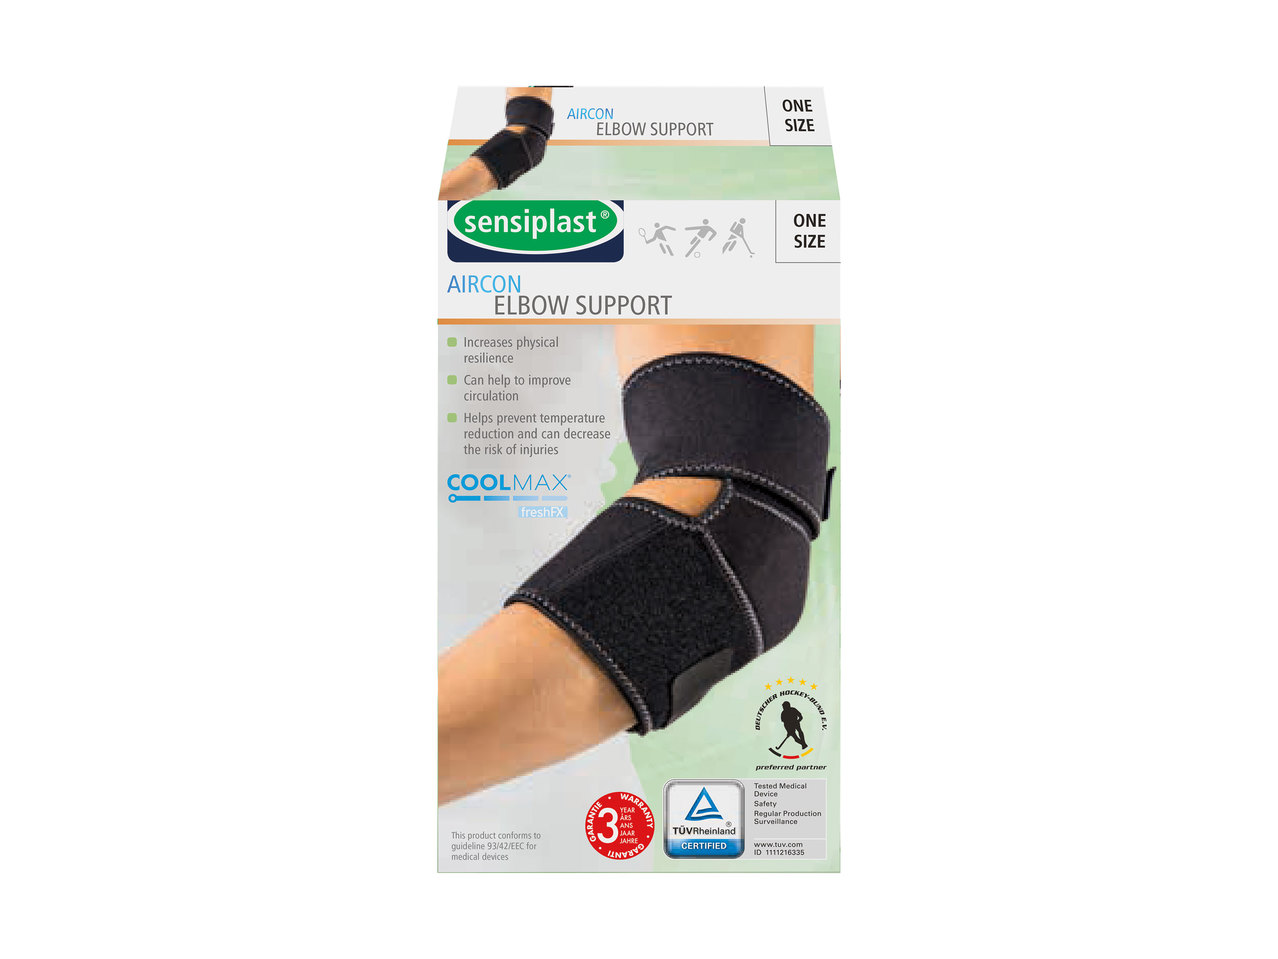 Sensiplast AIRcon Ankle, Elbow or Tennis Elbow Support1